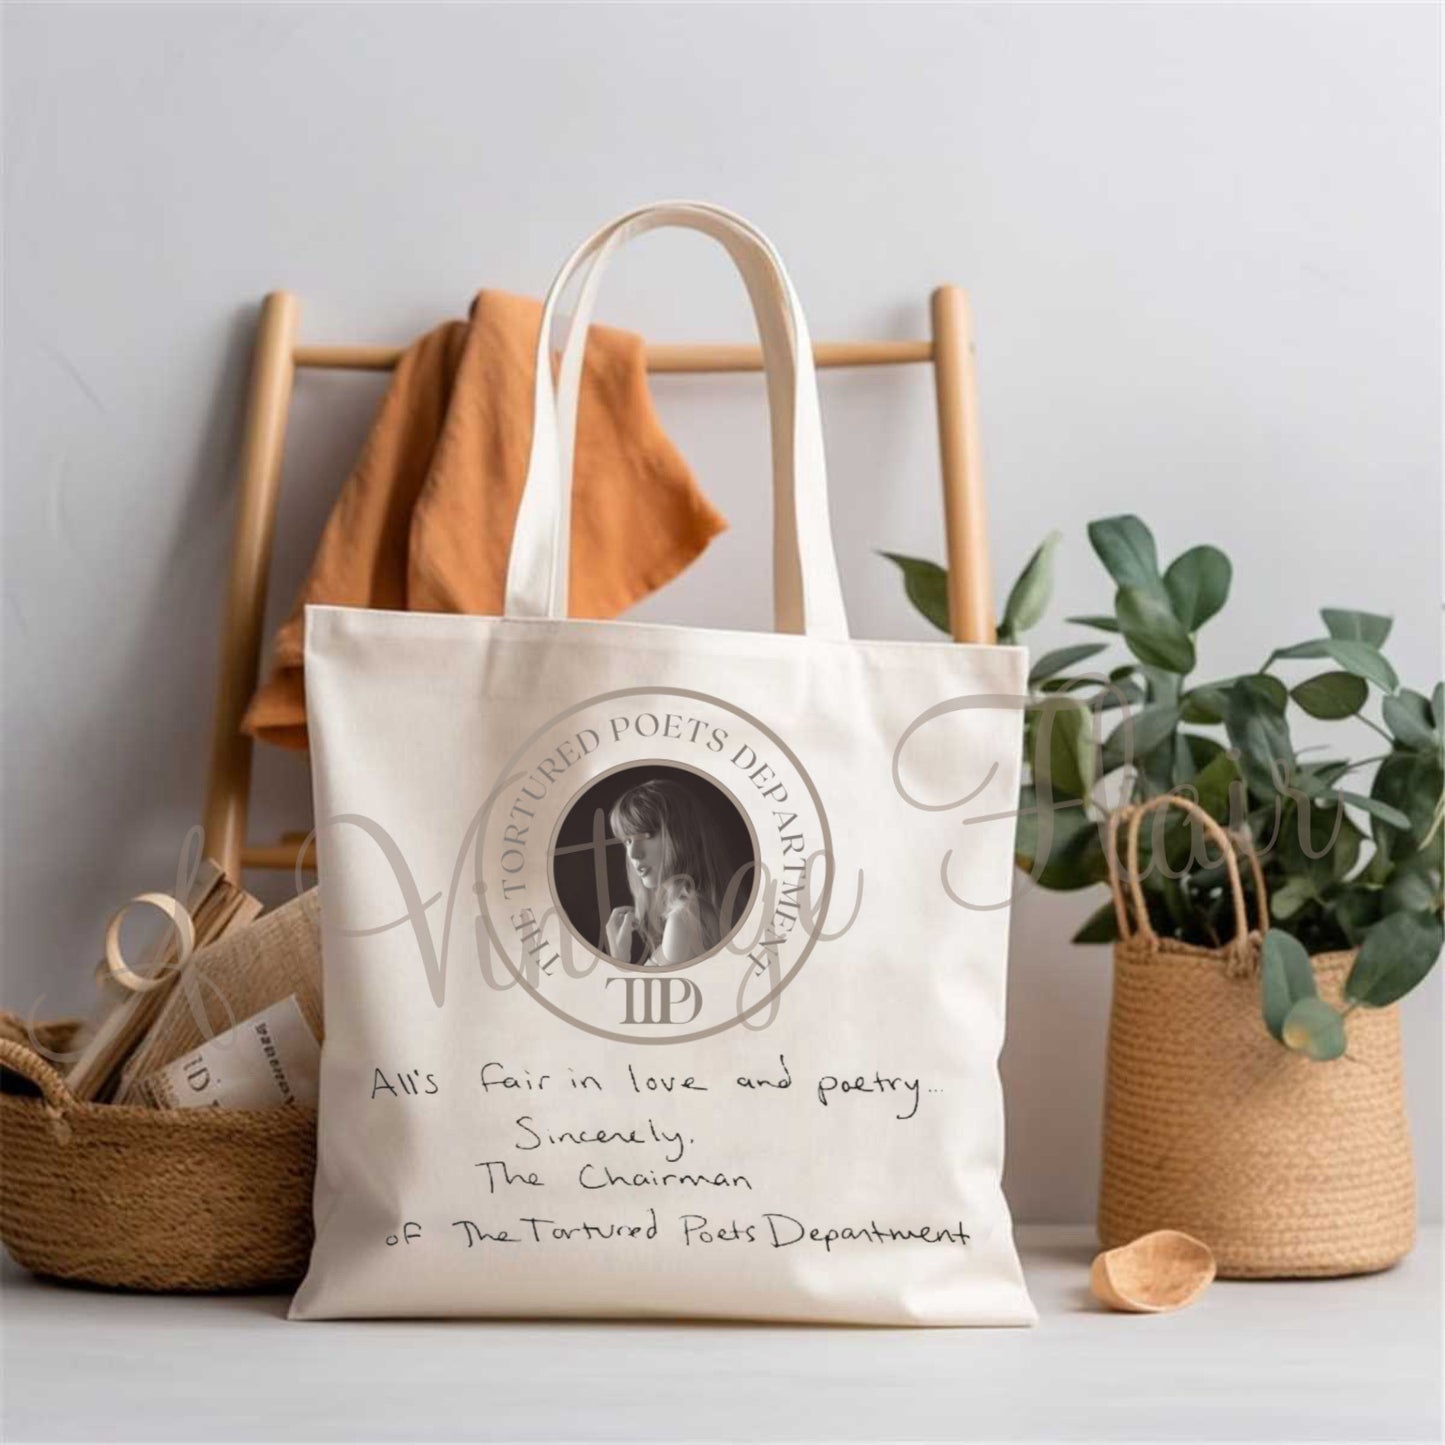 The Tortured Poets Department Canvas Bag